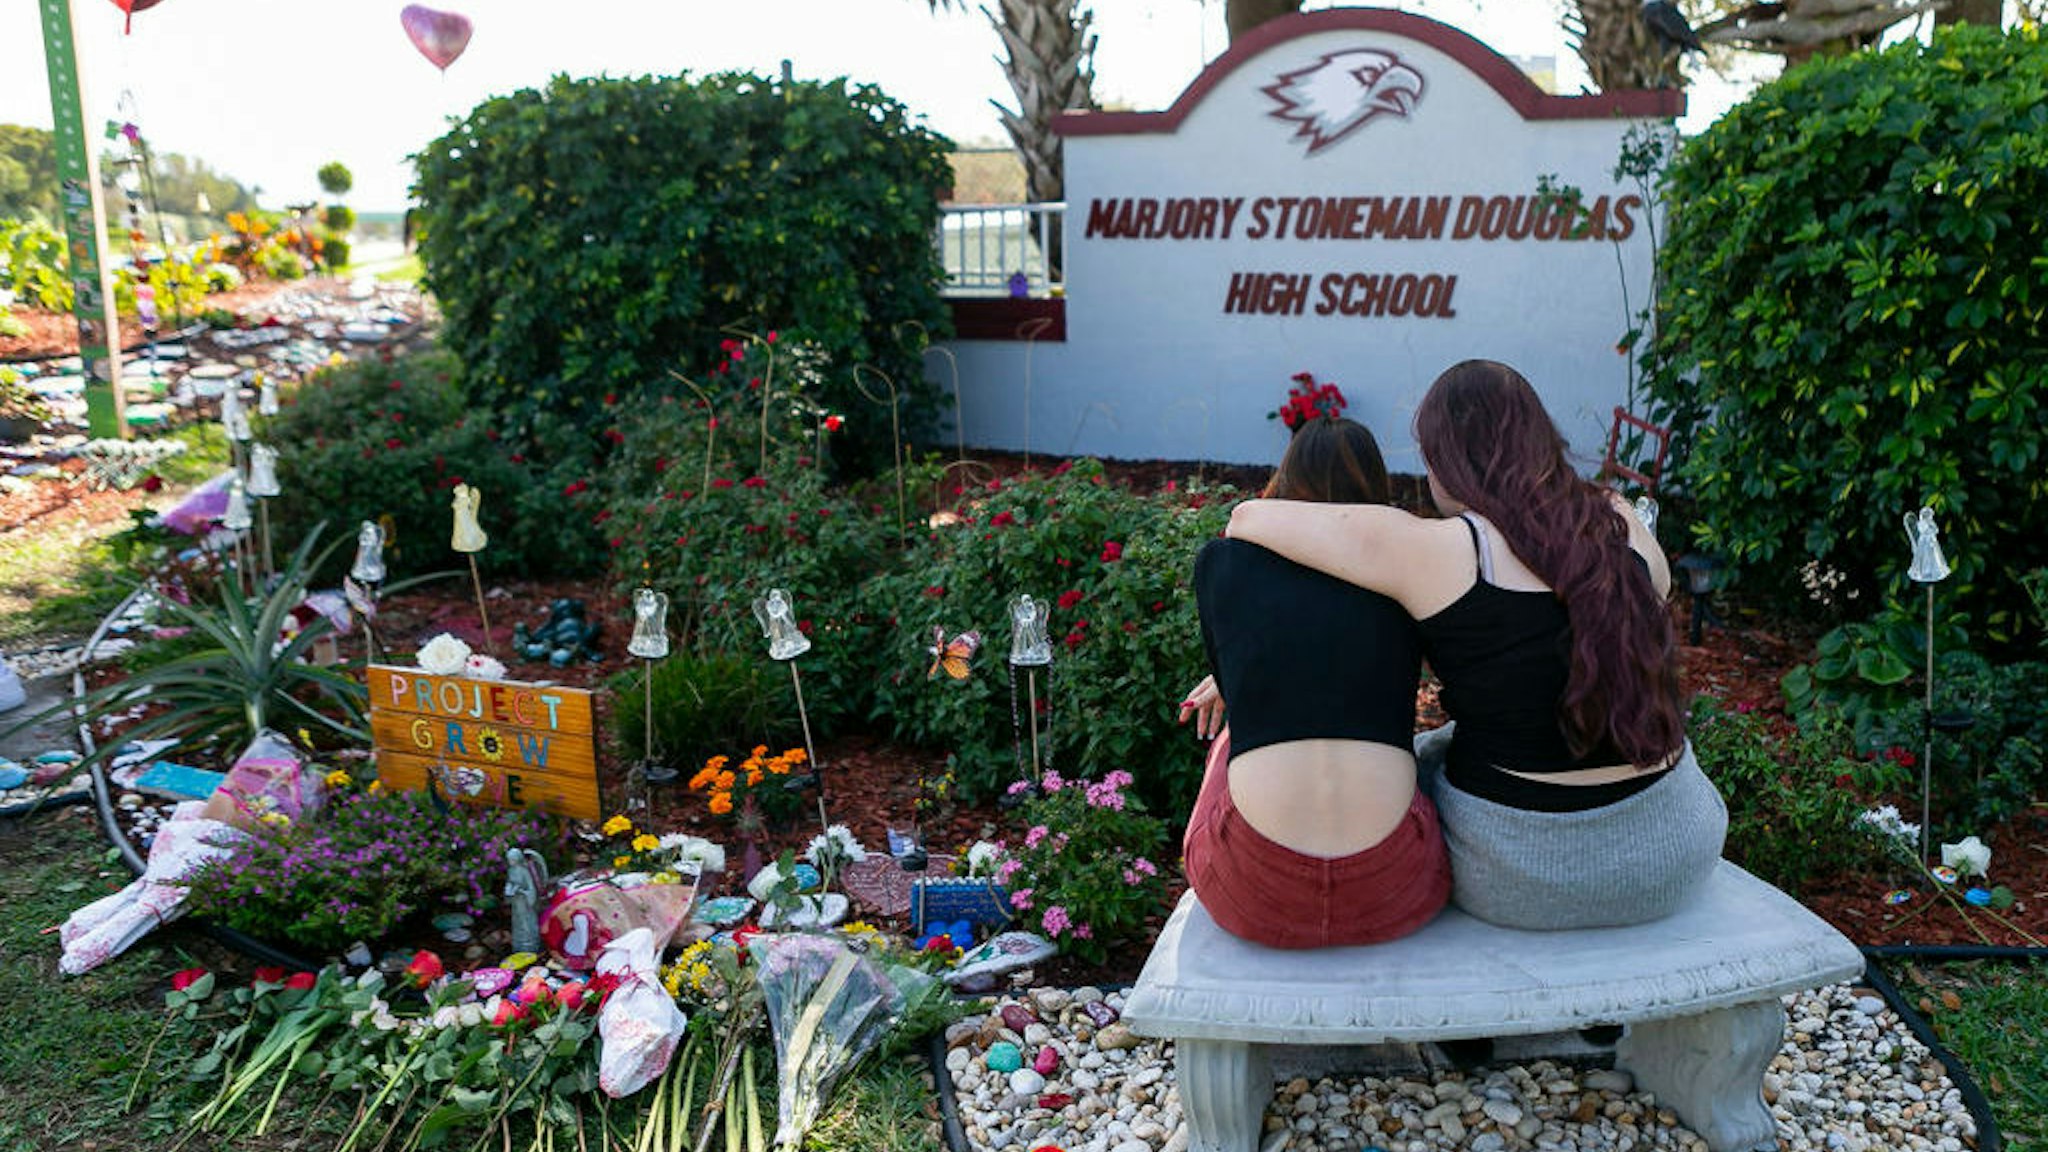 Jess Shanahan, 17, puts her arm around her friend, Lauryn Augustyne, 19, as they visit a makeshift memorial outside of Marjory Stoneman Douglas High School in Parkland, Fla., on Friday, Feb. 14, 2020, during the two-year anniversary of the Parkland shooting where 17 victims were killed. (Matias J. Ocner/Miami Herald/TNS)